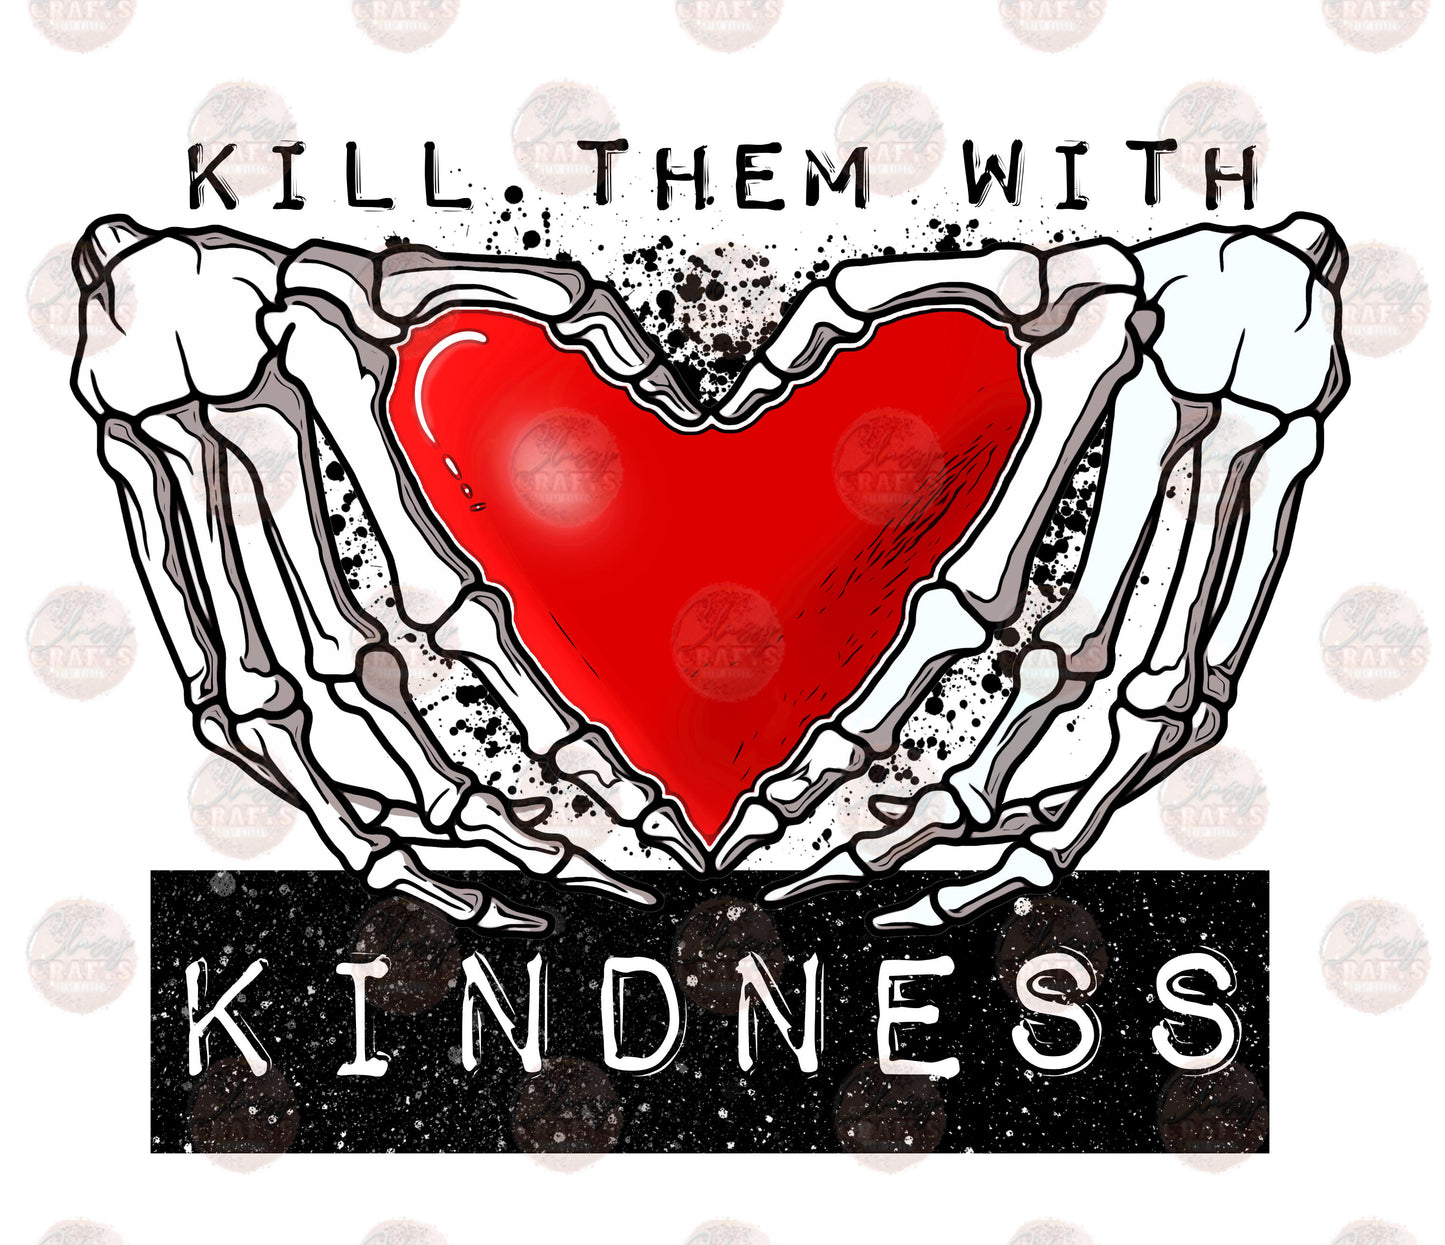 Kill Them With Kindness/ Blk Font - Sublimation Transfer